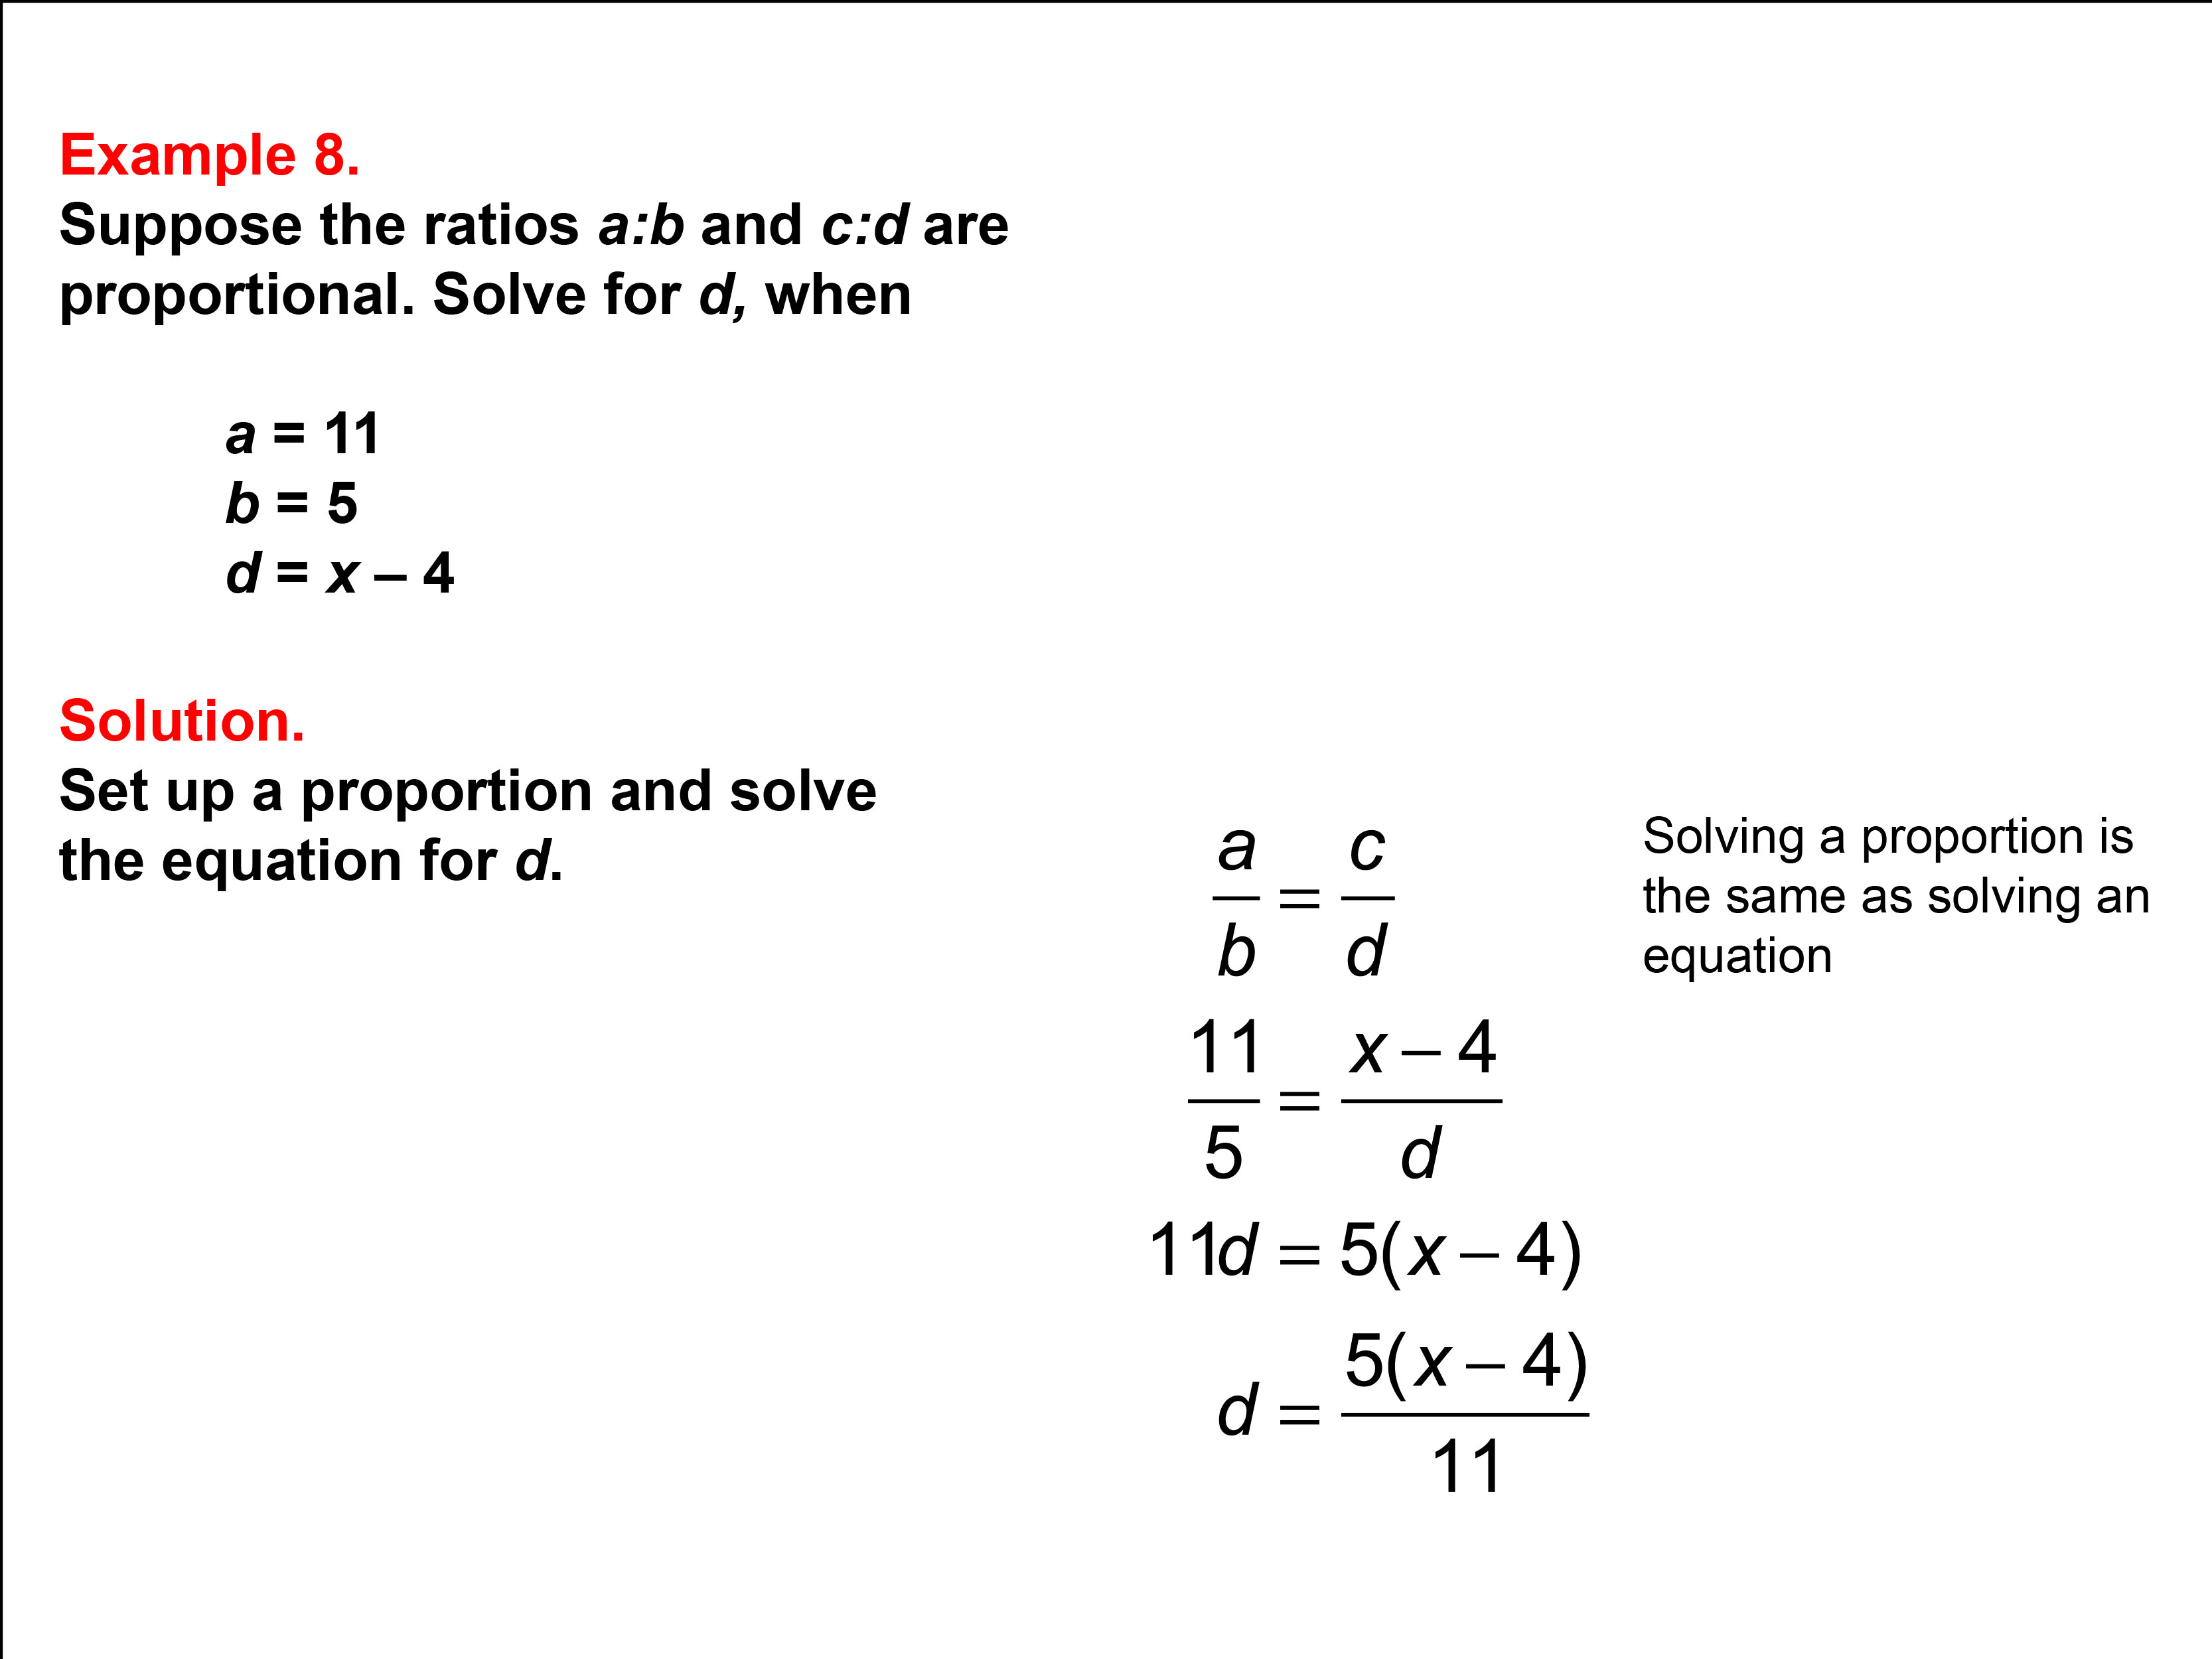 Solving Proportions: Example 8. Solving a proportion of the form A over B equals C over D for d. Other variables expressed as variables and numbers.